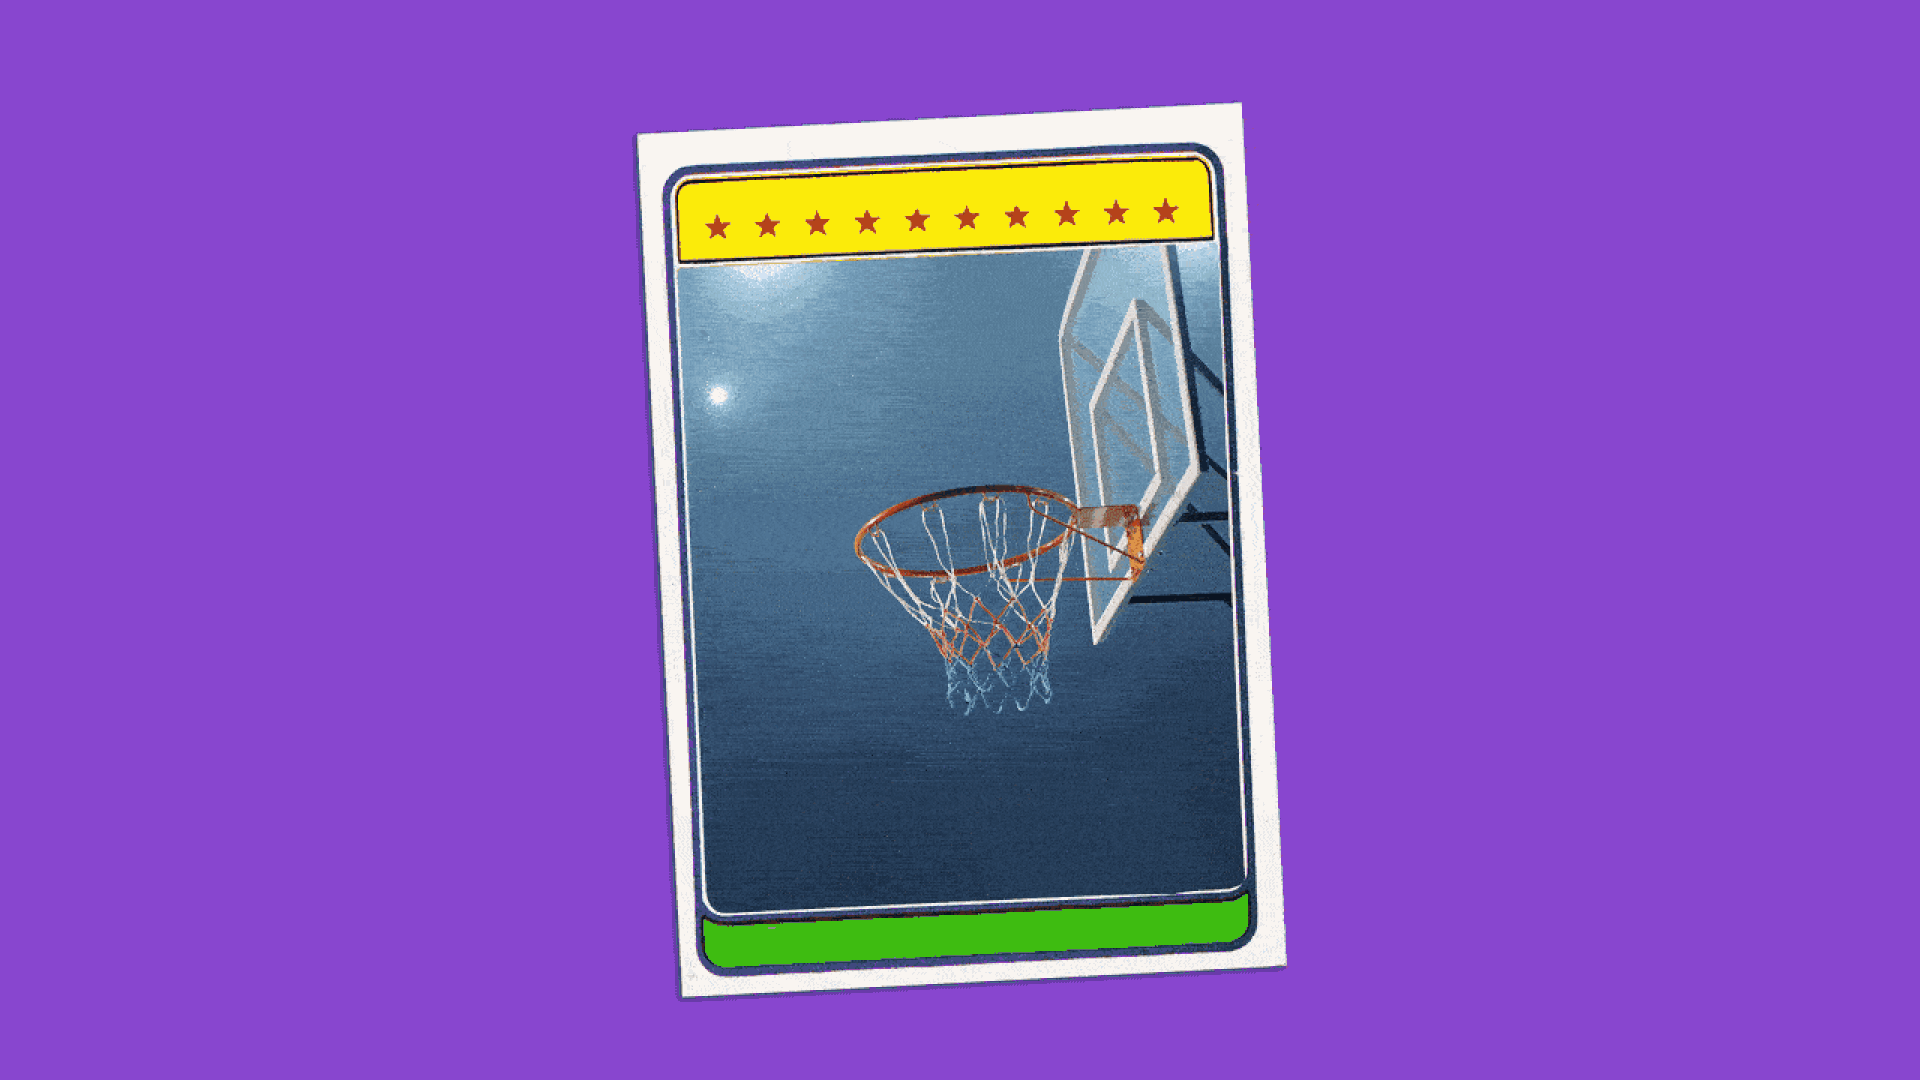 GIF of a person dunking on a basketball hoop.